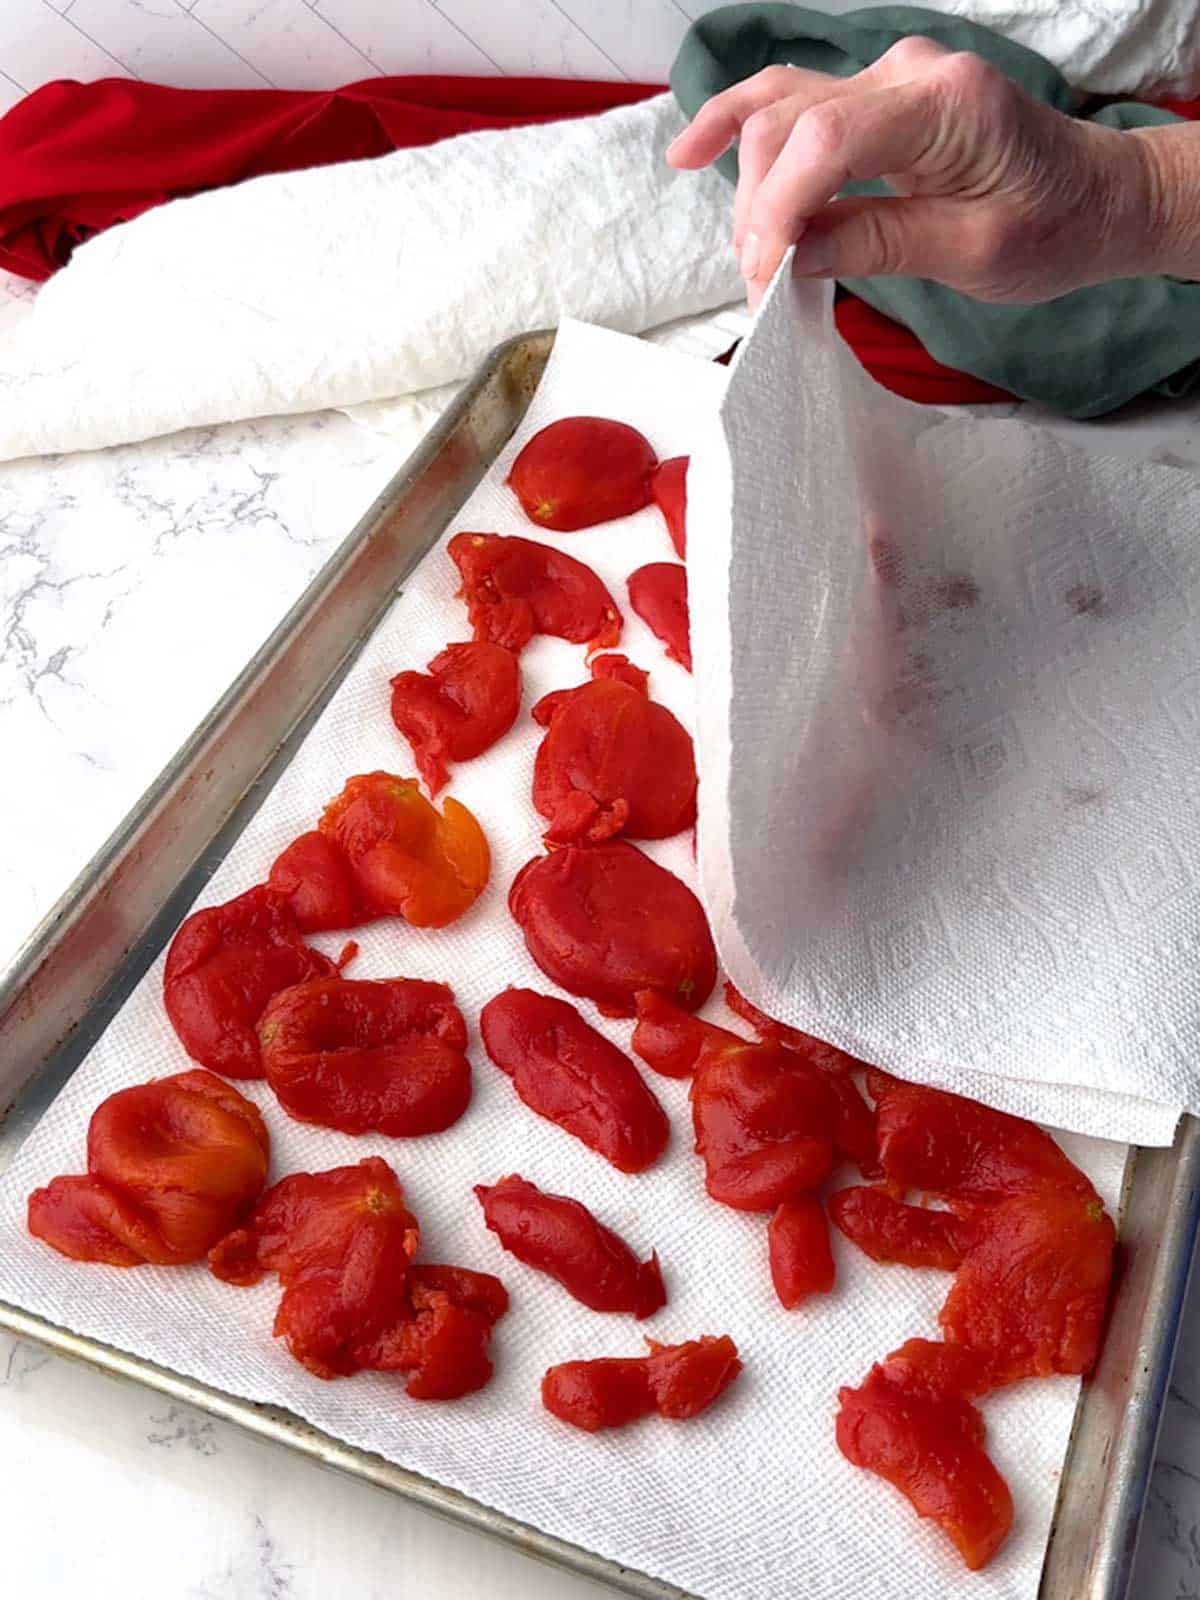 Blotting the tomatoes with a paper towel.